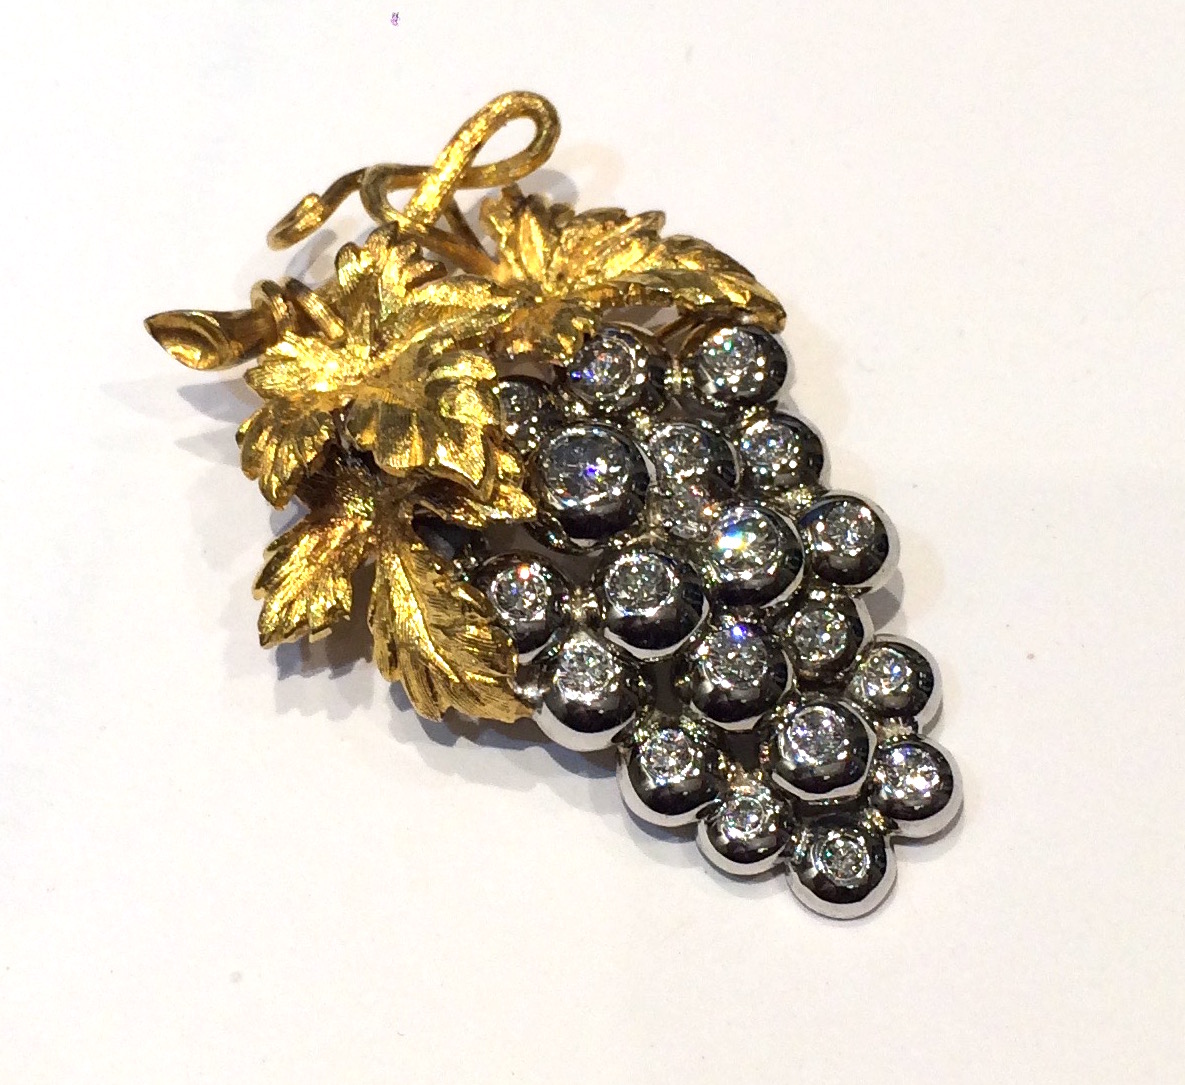 Stylized “Grape Cluster” brooch with platinum grapes set with 20 round cut diamonds (approx. 3.50 carats TW) and highly textured and detailed 18k gold leaves and vines, c.1980’s